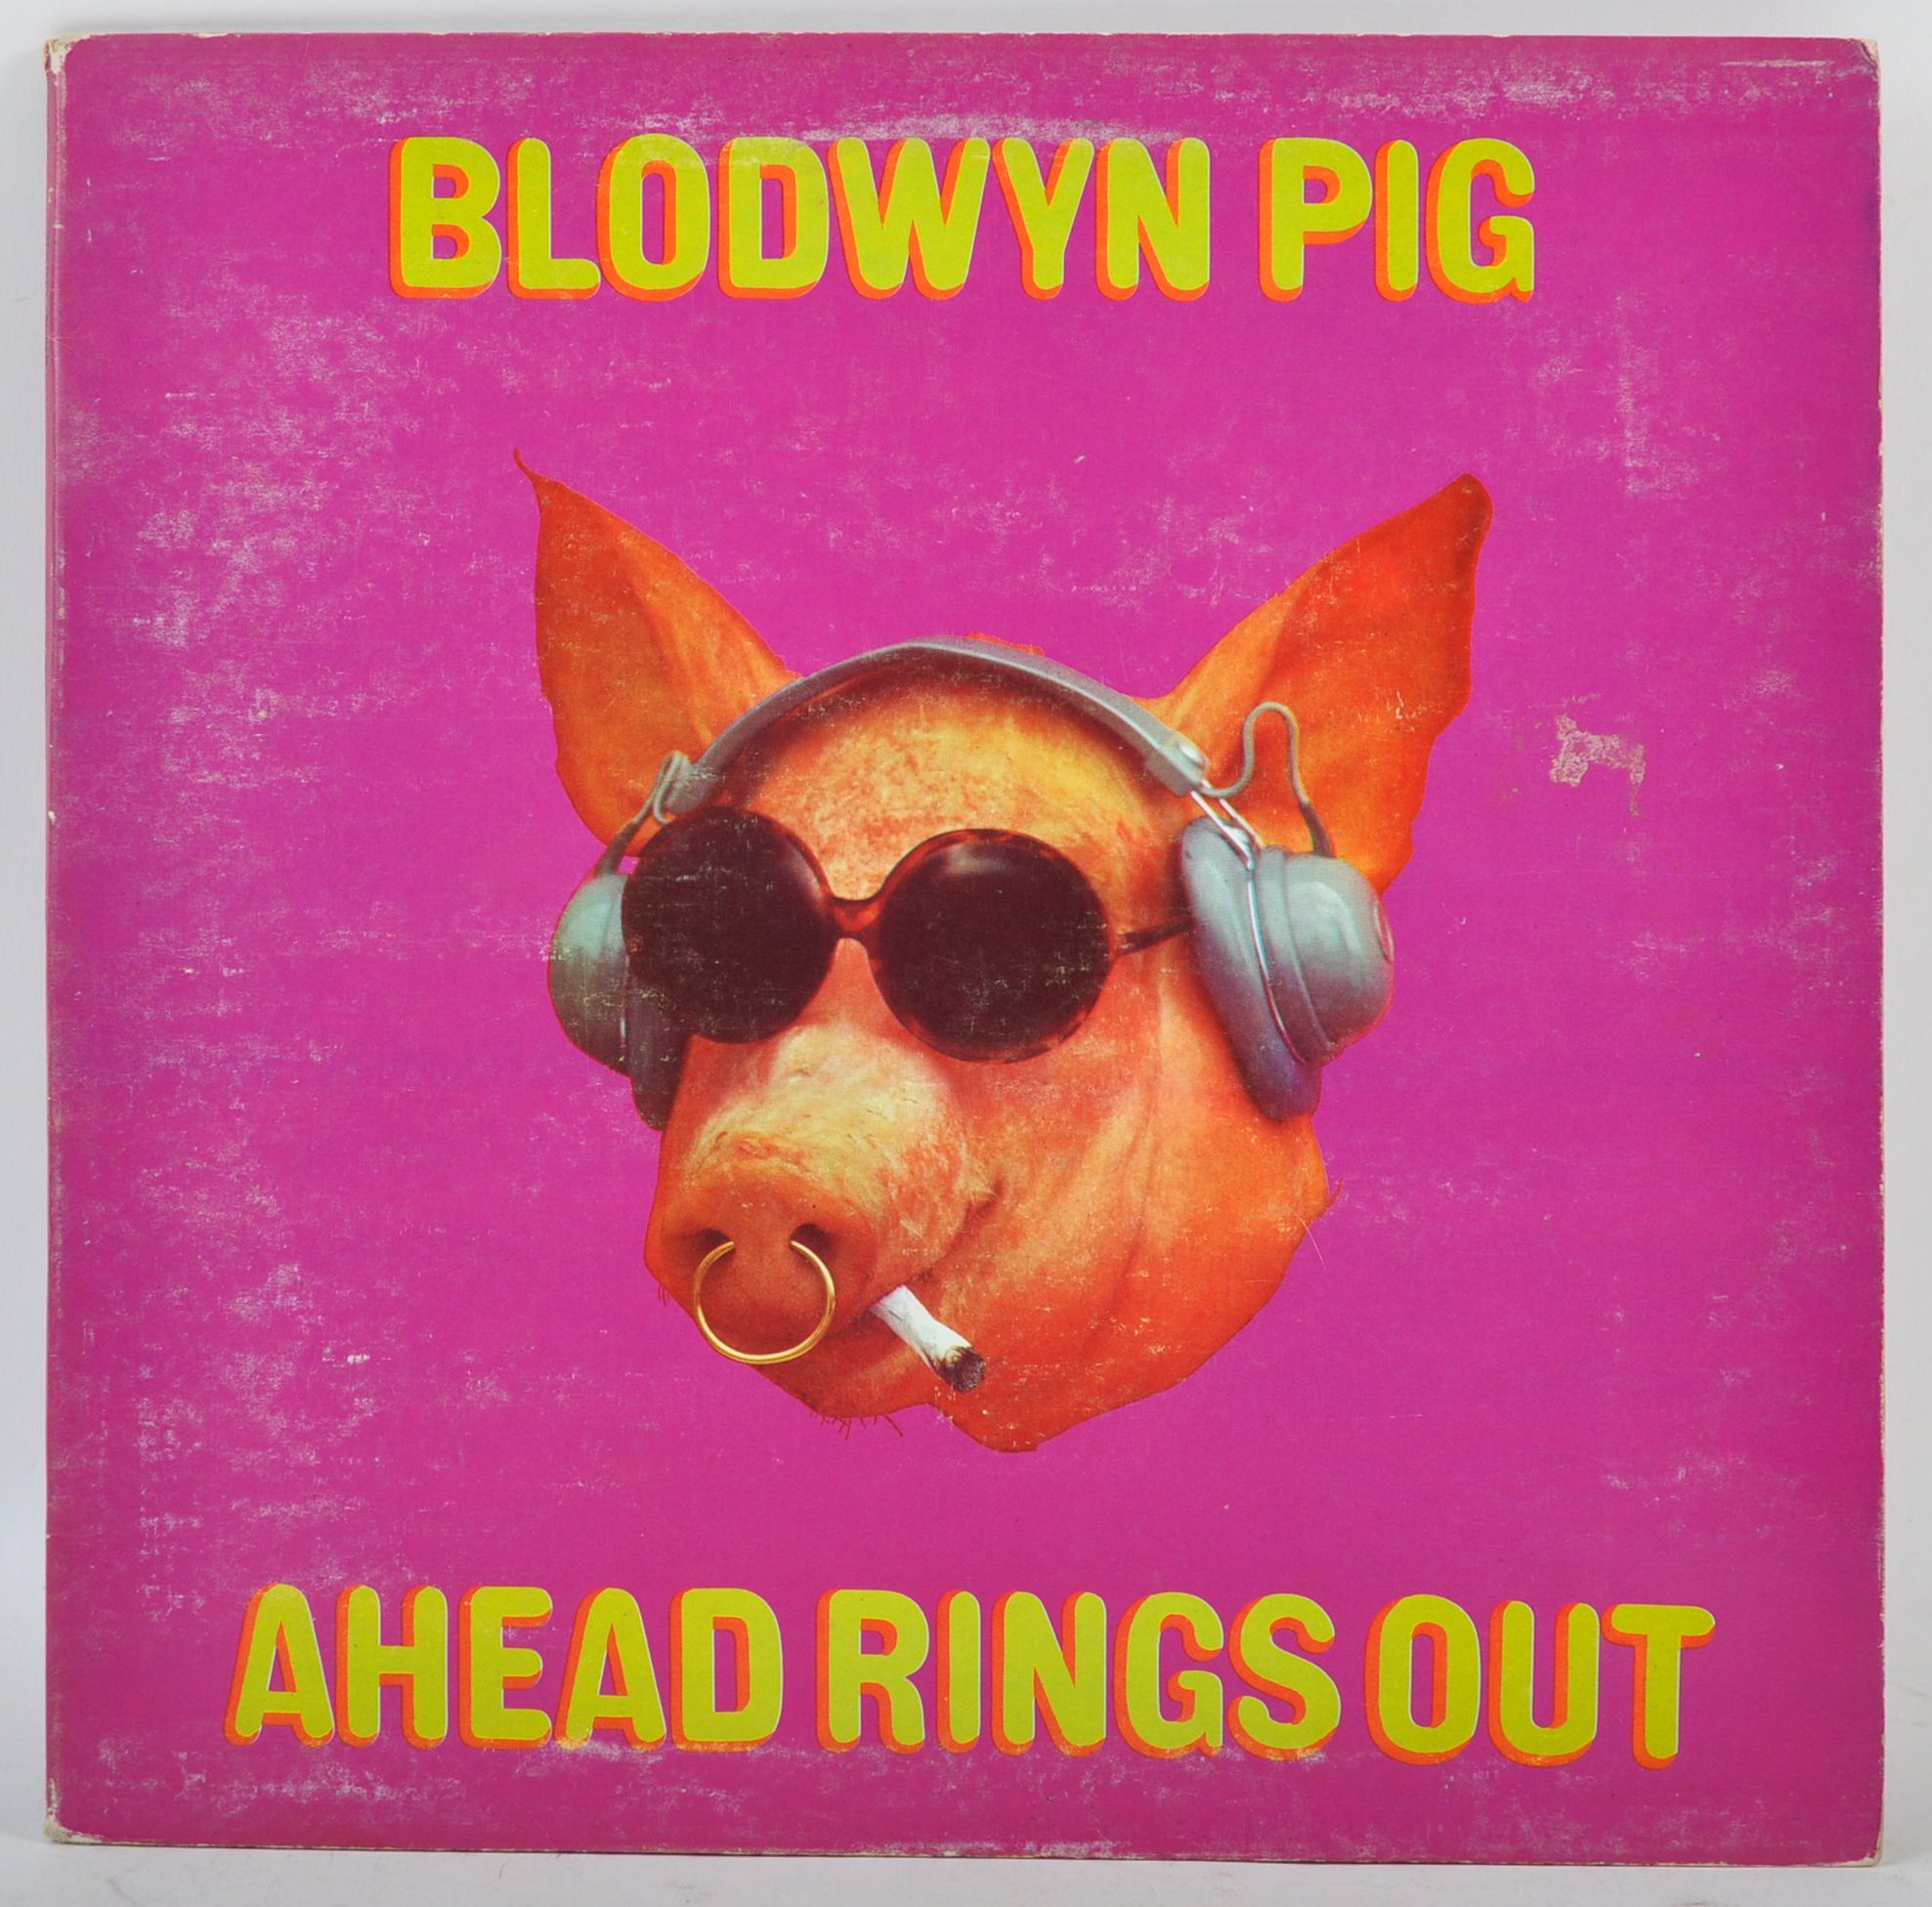 BLODWYN PIG - AHEAD RINGS OUT - 1969 ISLAND RECORDS RELEASE